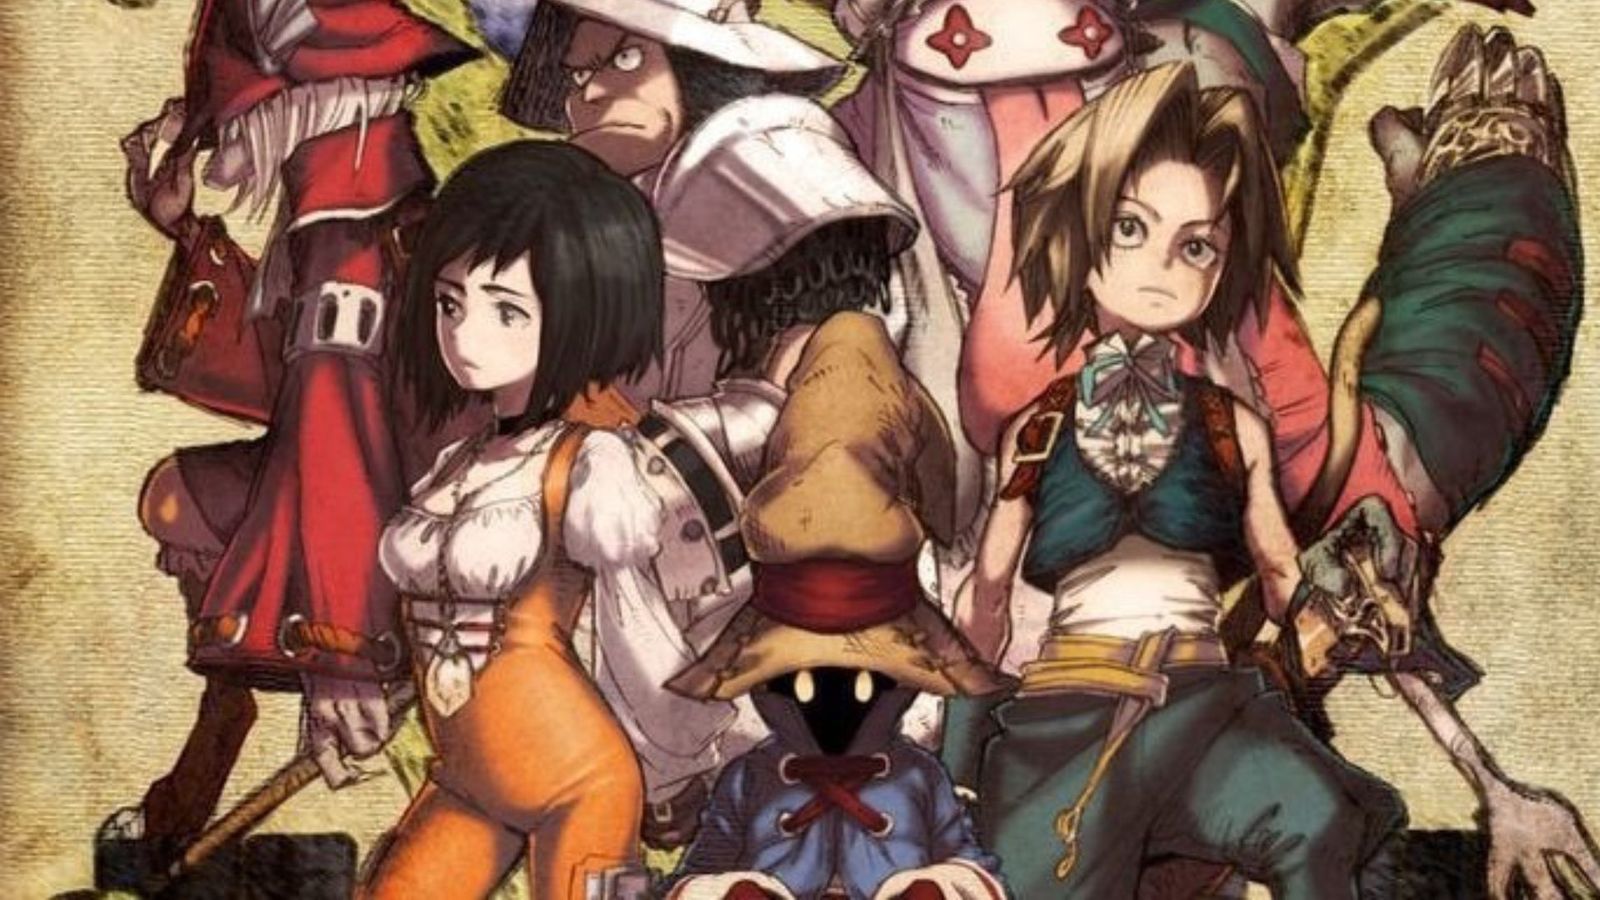 The cast of Final Fantasy 9 all bunched together in a group photo 